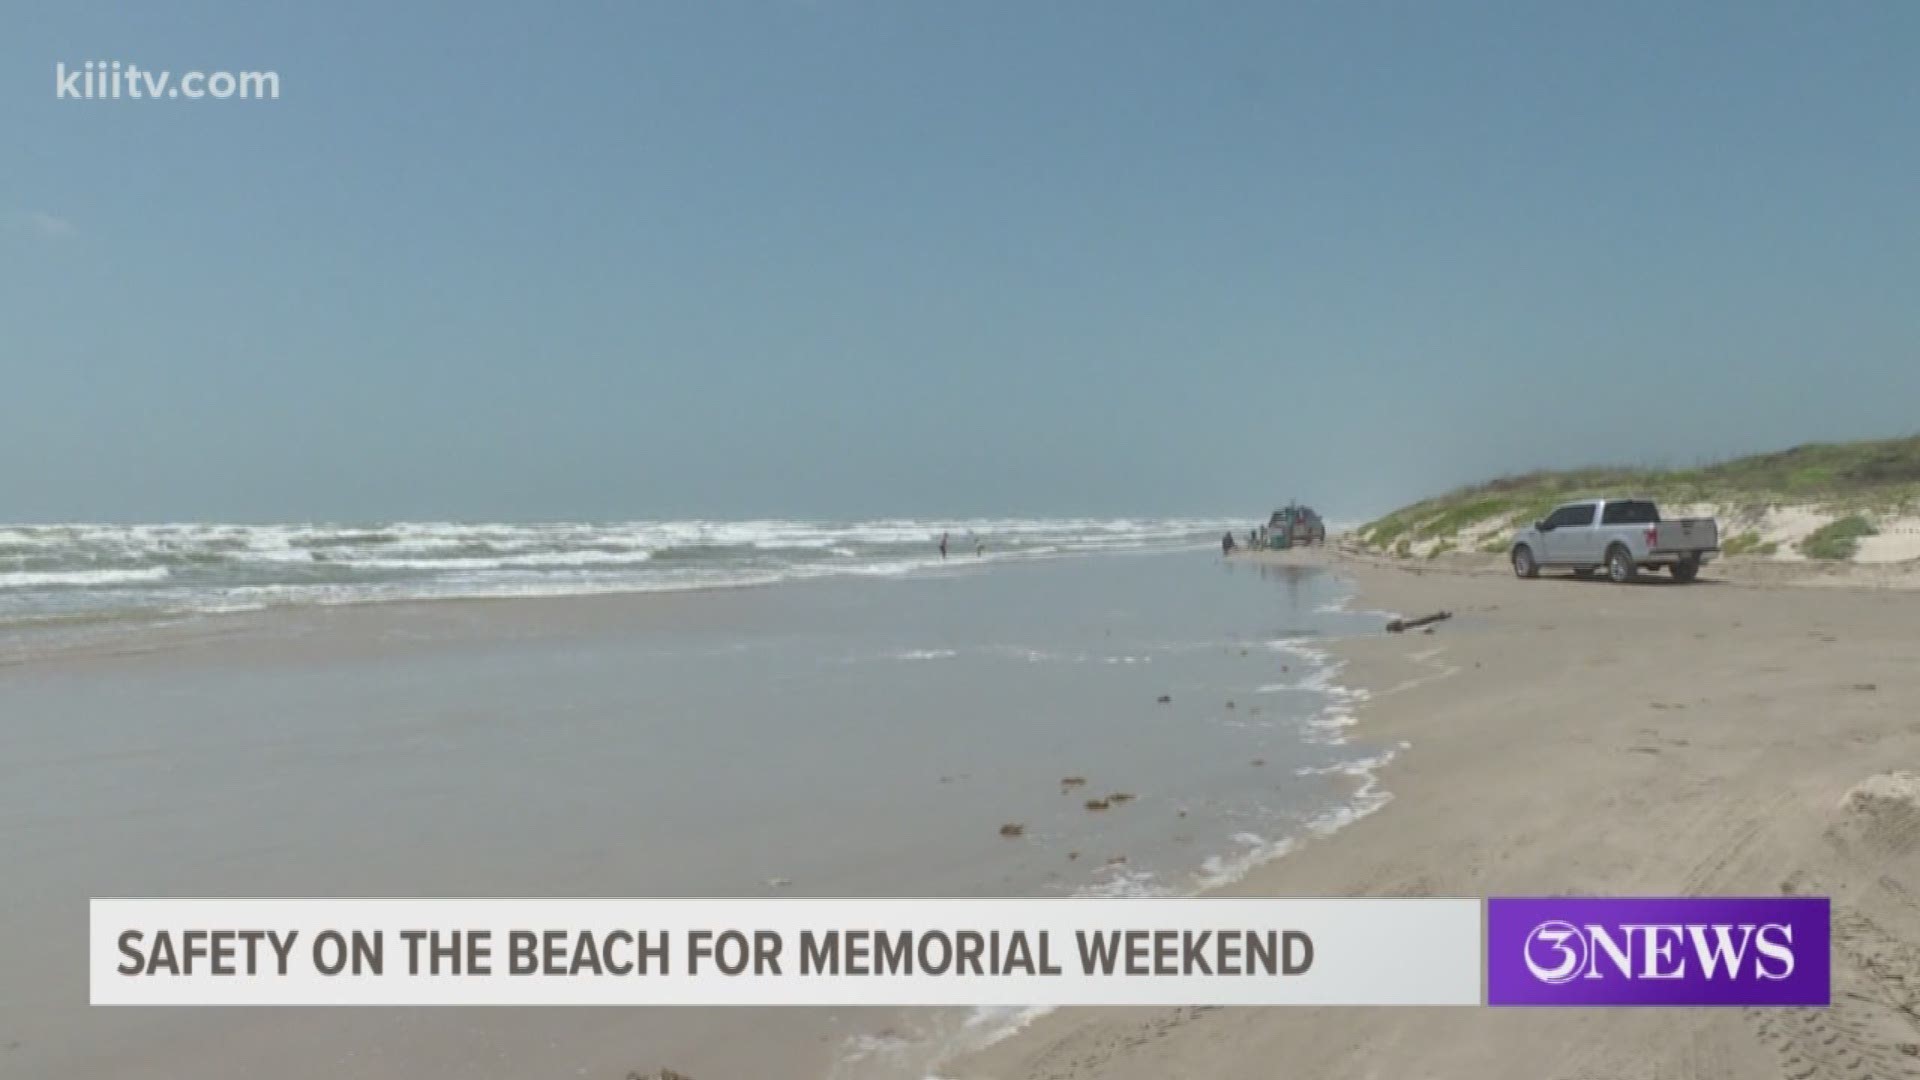 Many Coastal Bend tourists and residents alike will hit the beaches this Memorial Day weekend, and officials want to make sure everyone plays it safe.